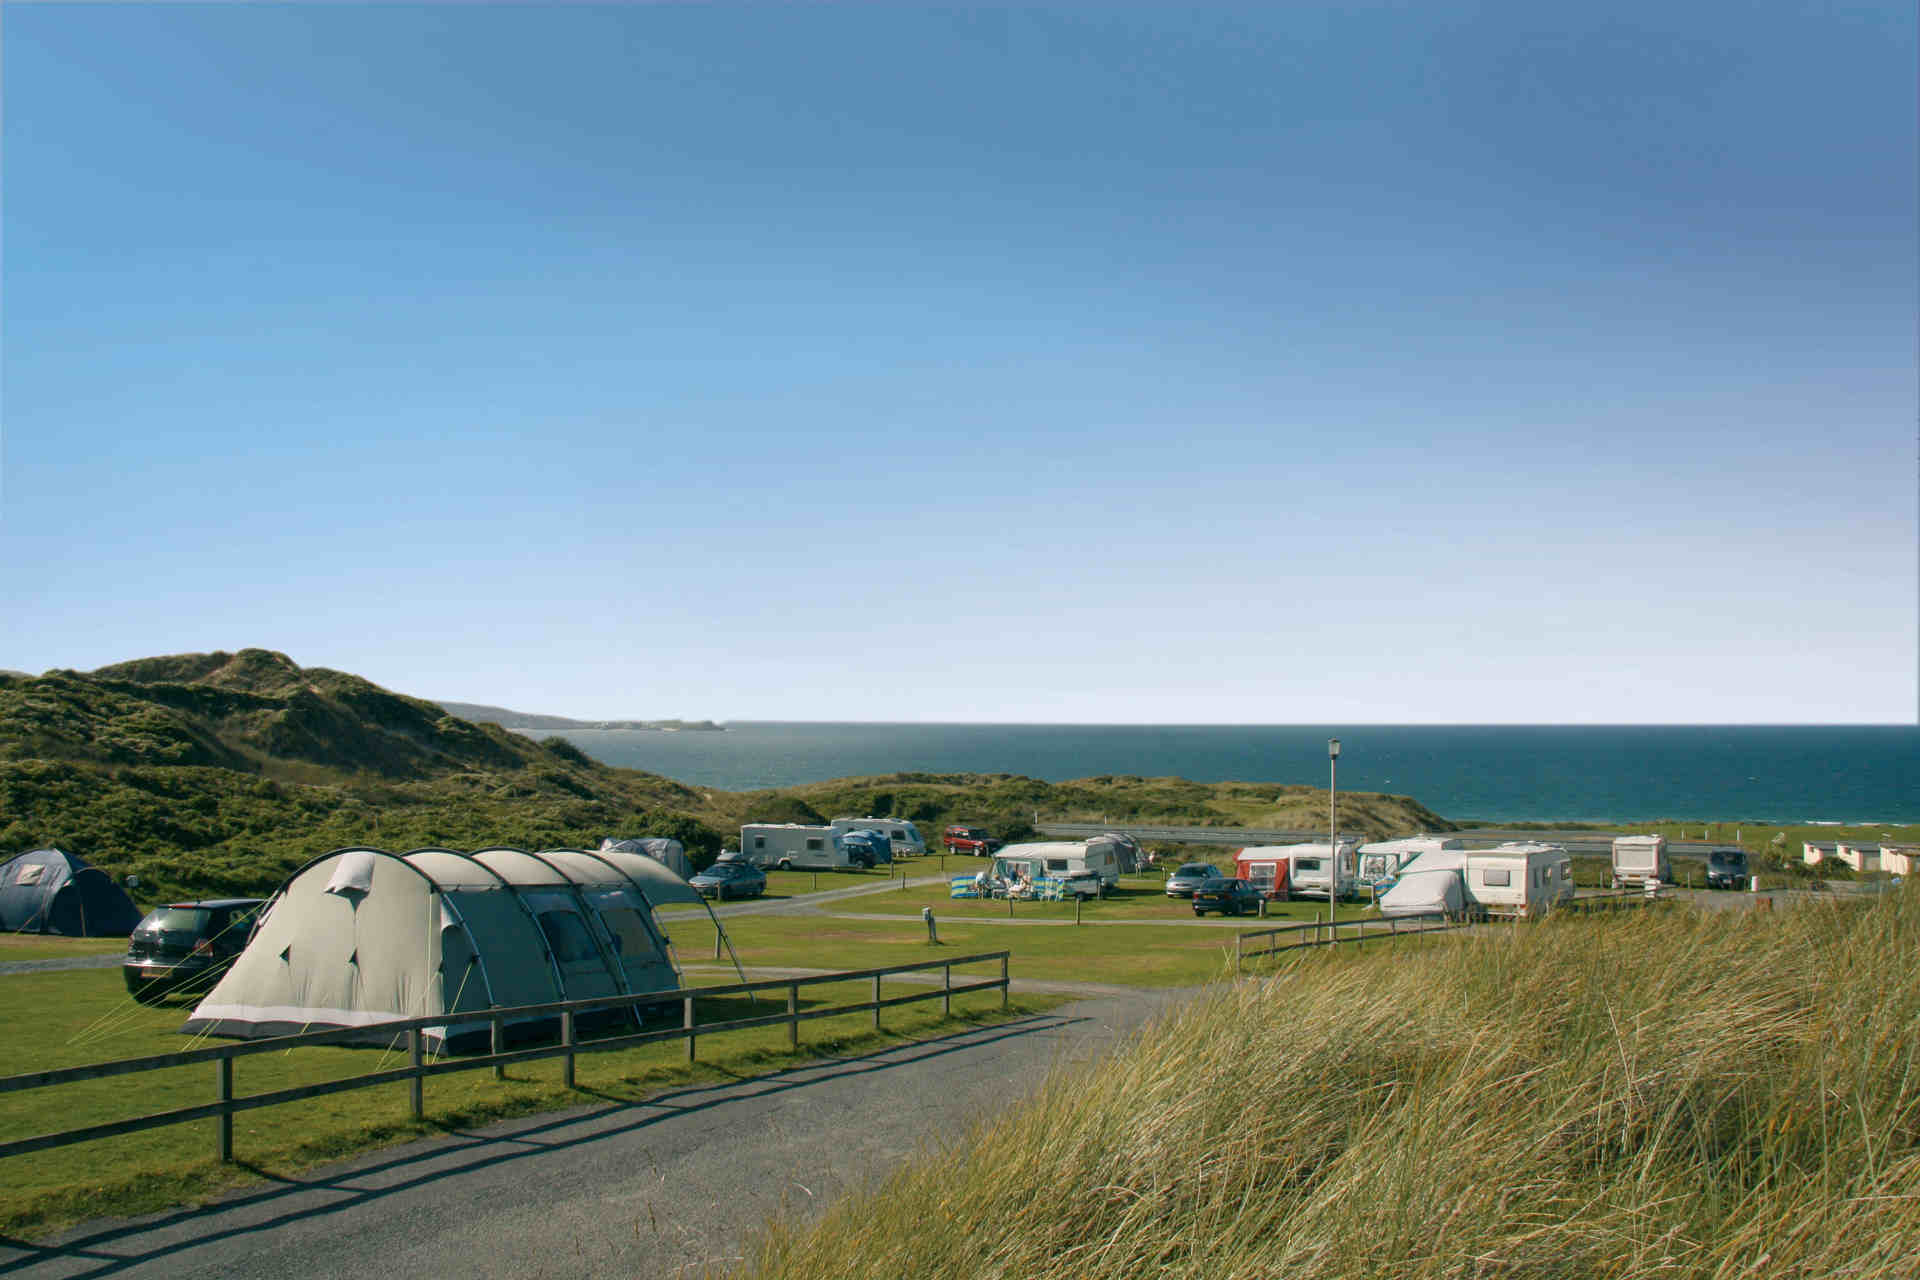 Tents and camping pitches at Beachside Holiday Park